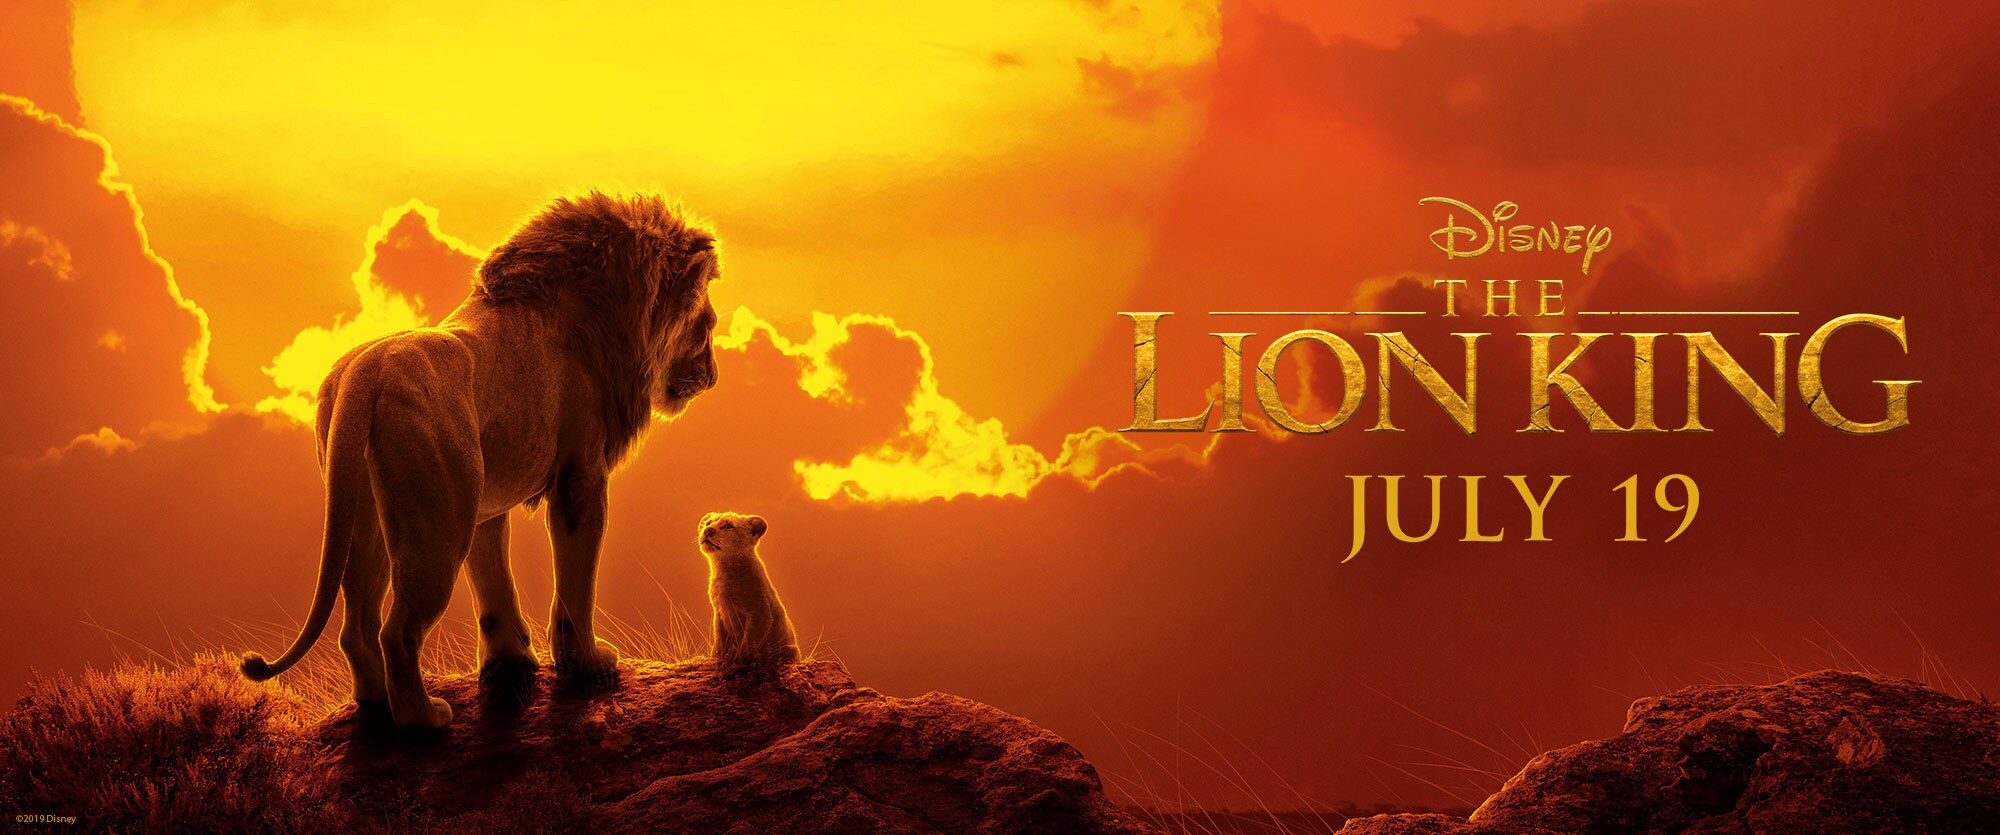 The Lion King_Movie Page_Hero New Banner